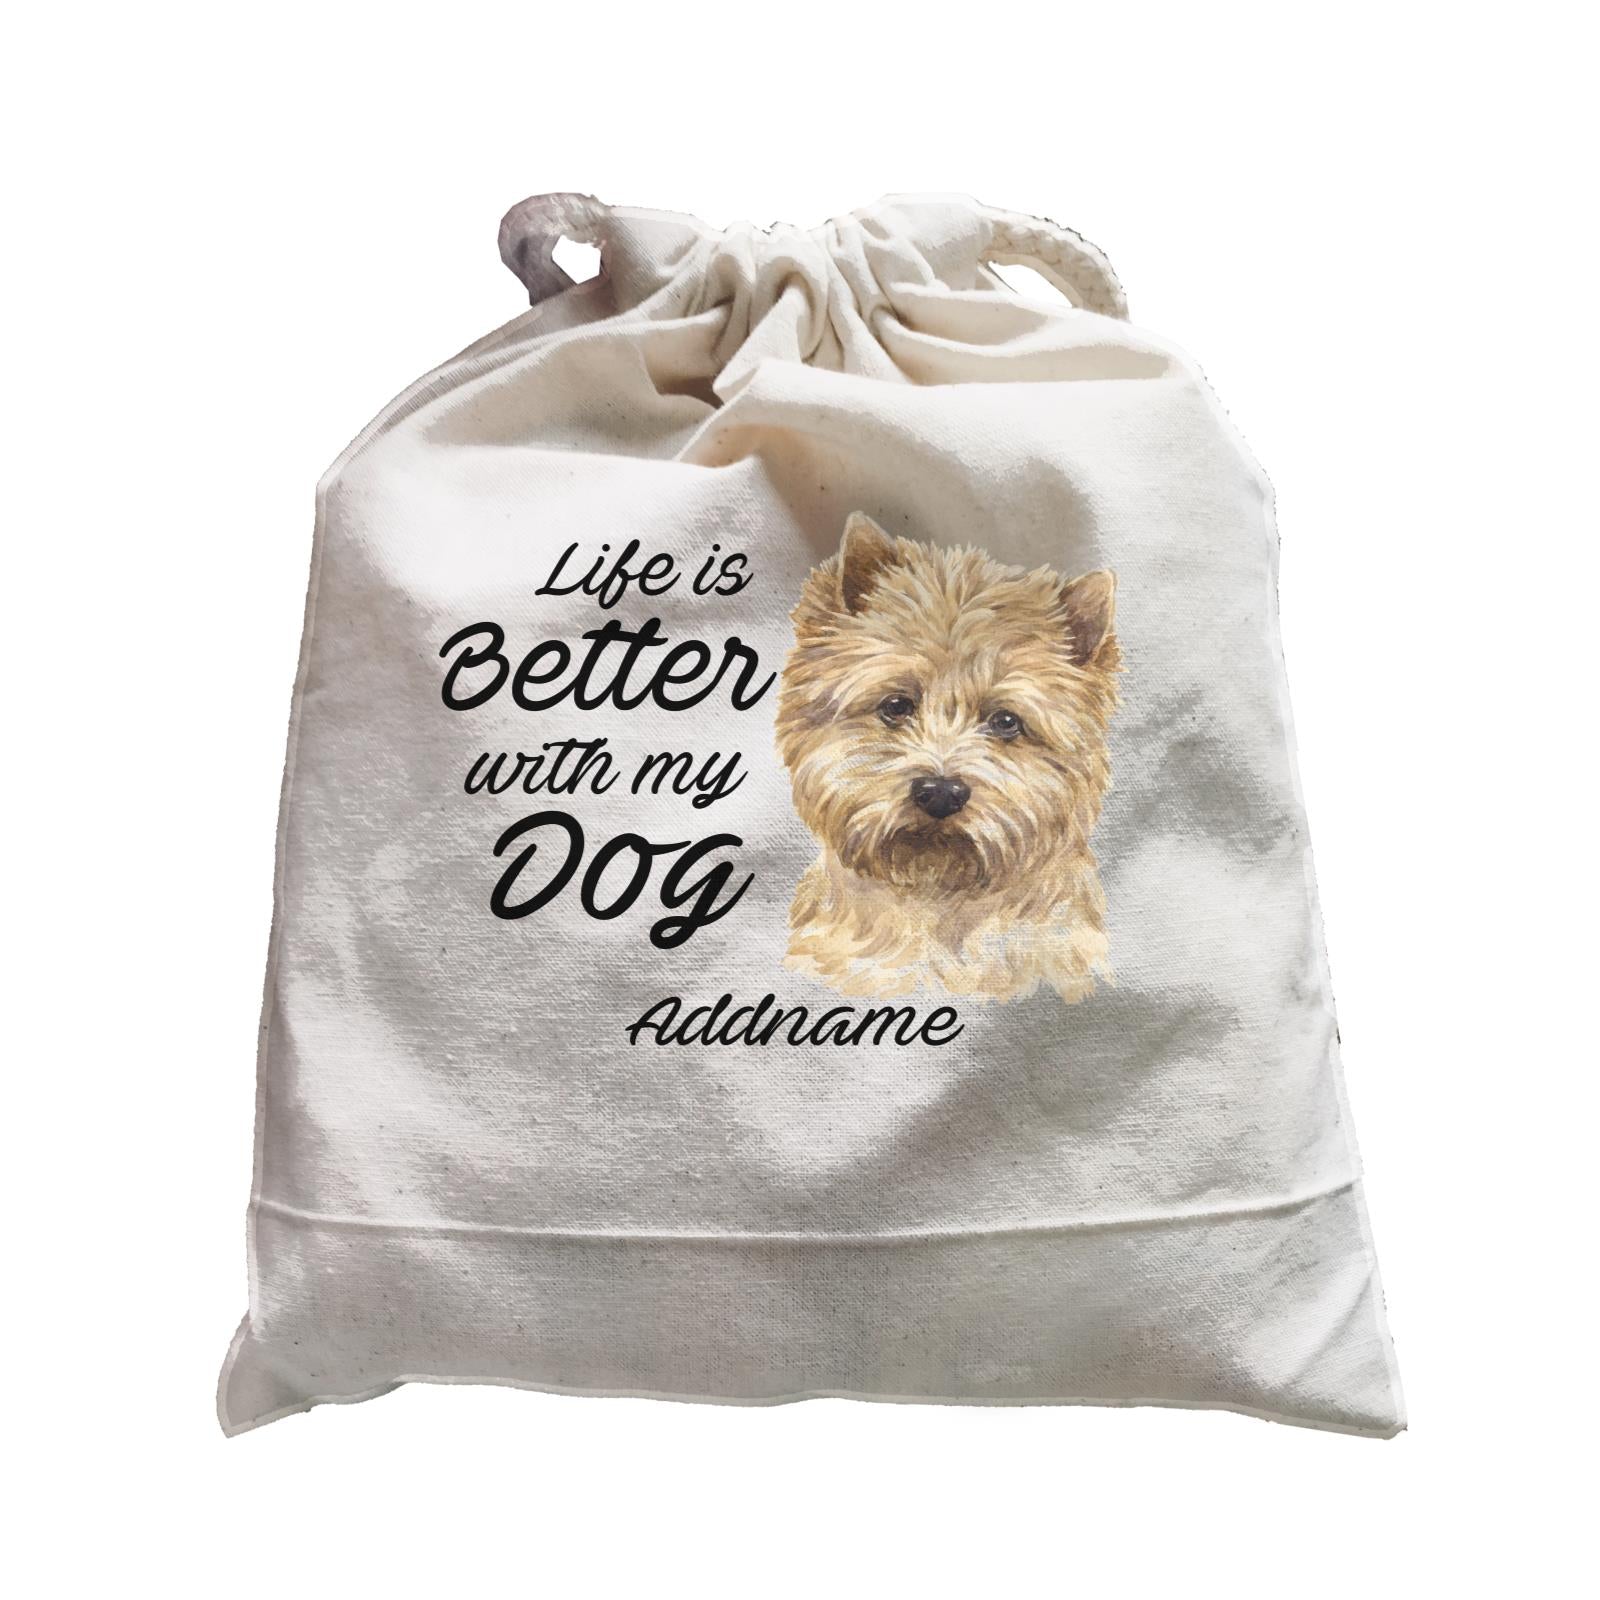 Watercolor Life is Better With My Dog Cairn Terrier Addname Satchel